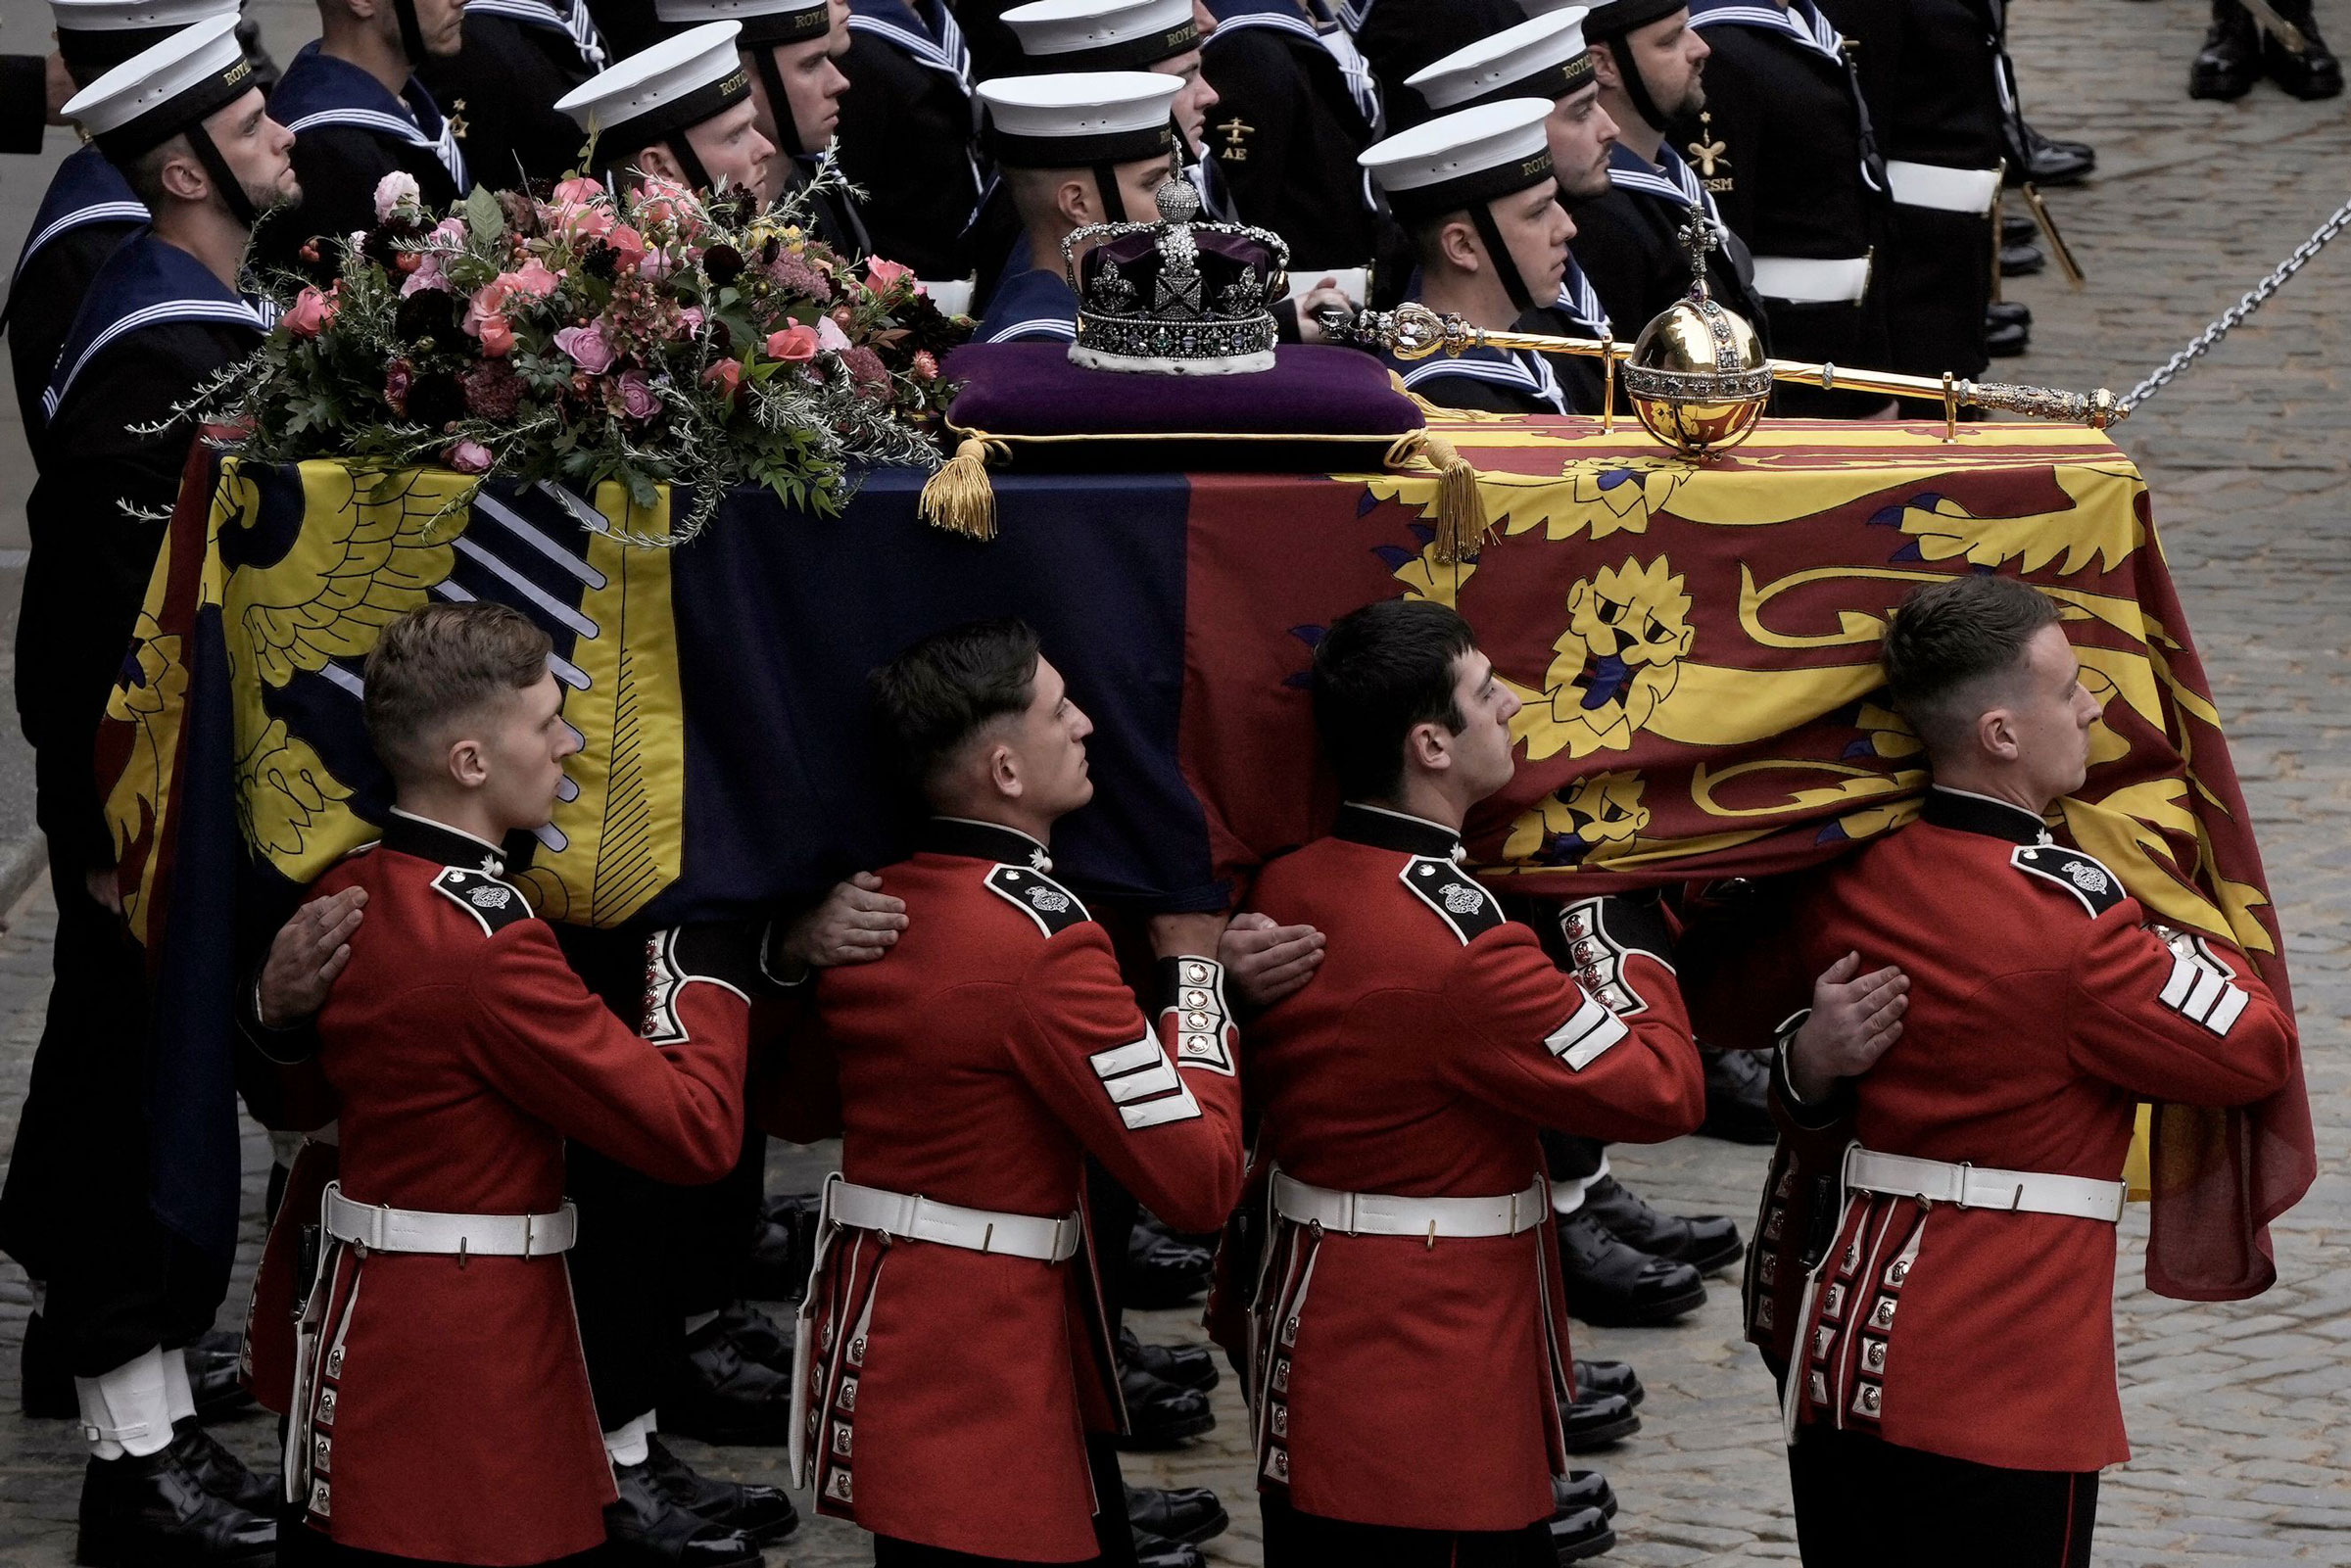 The coffin of Queen Elizabeth II is loaded onto a gun carriage pulled by Royal Navy soldiers to go from Westminster Hall for her funeral service in Westminster Abbey.